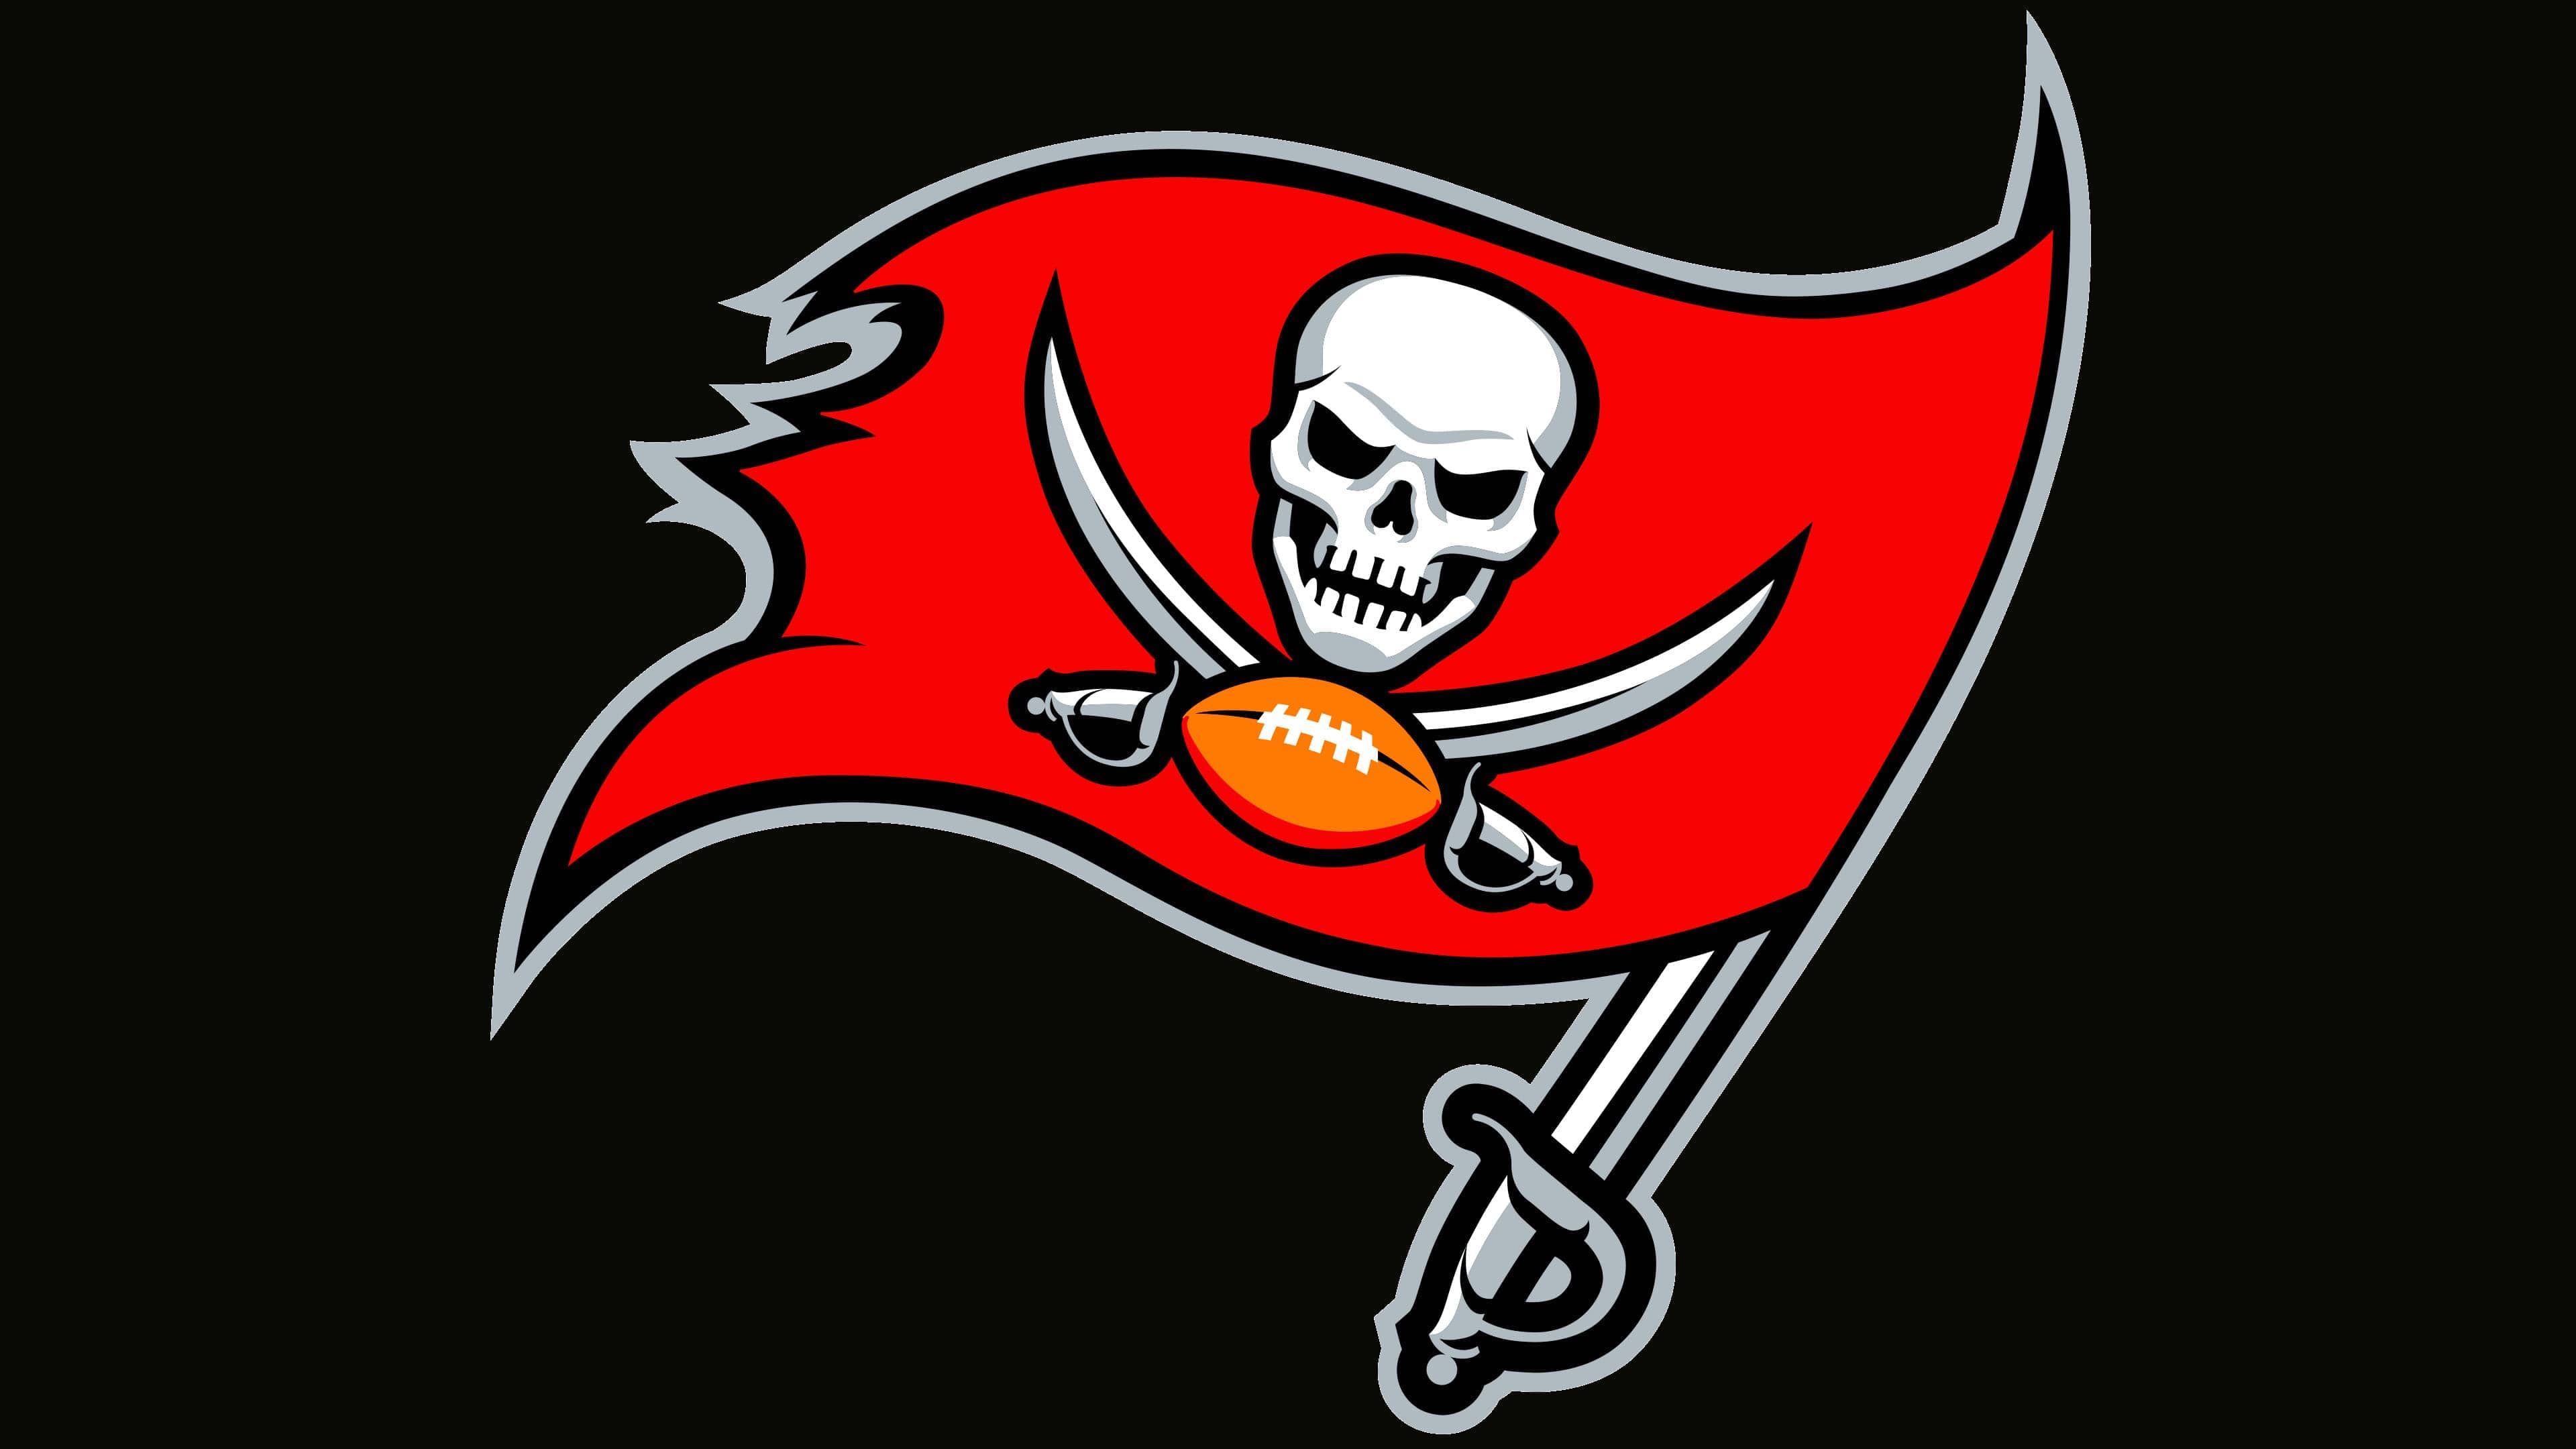 Tampa Bay Buccaneers Logo Png Black And White / In 2020, the buccaneers